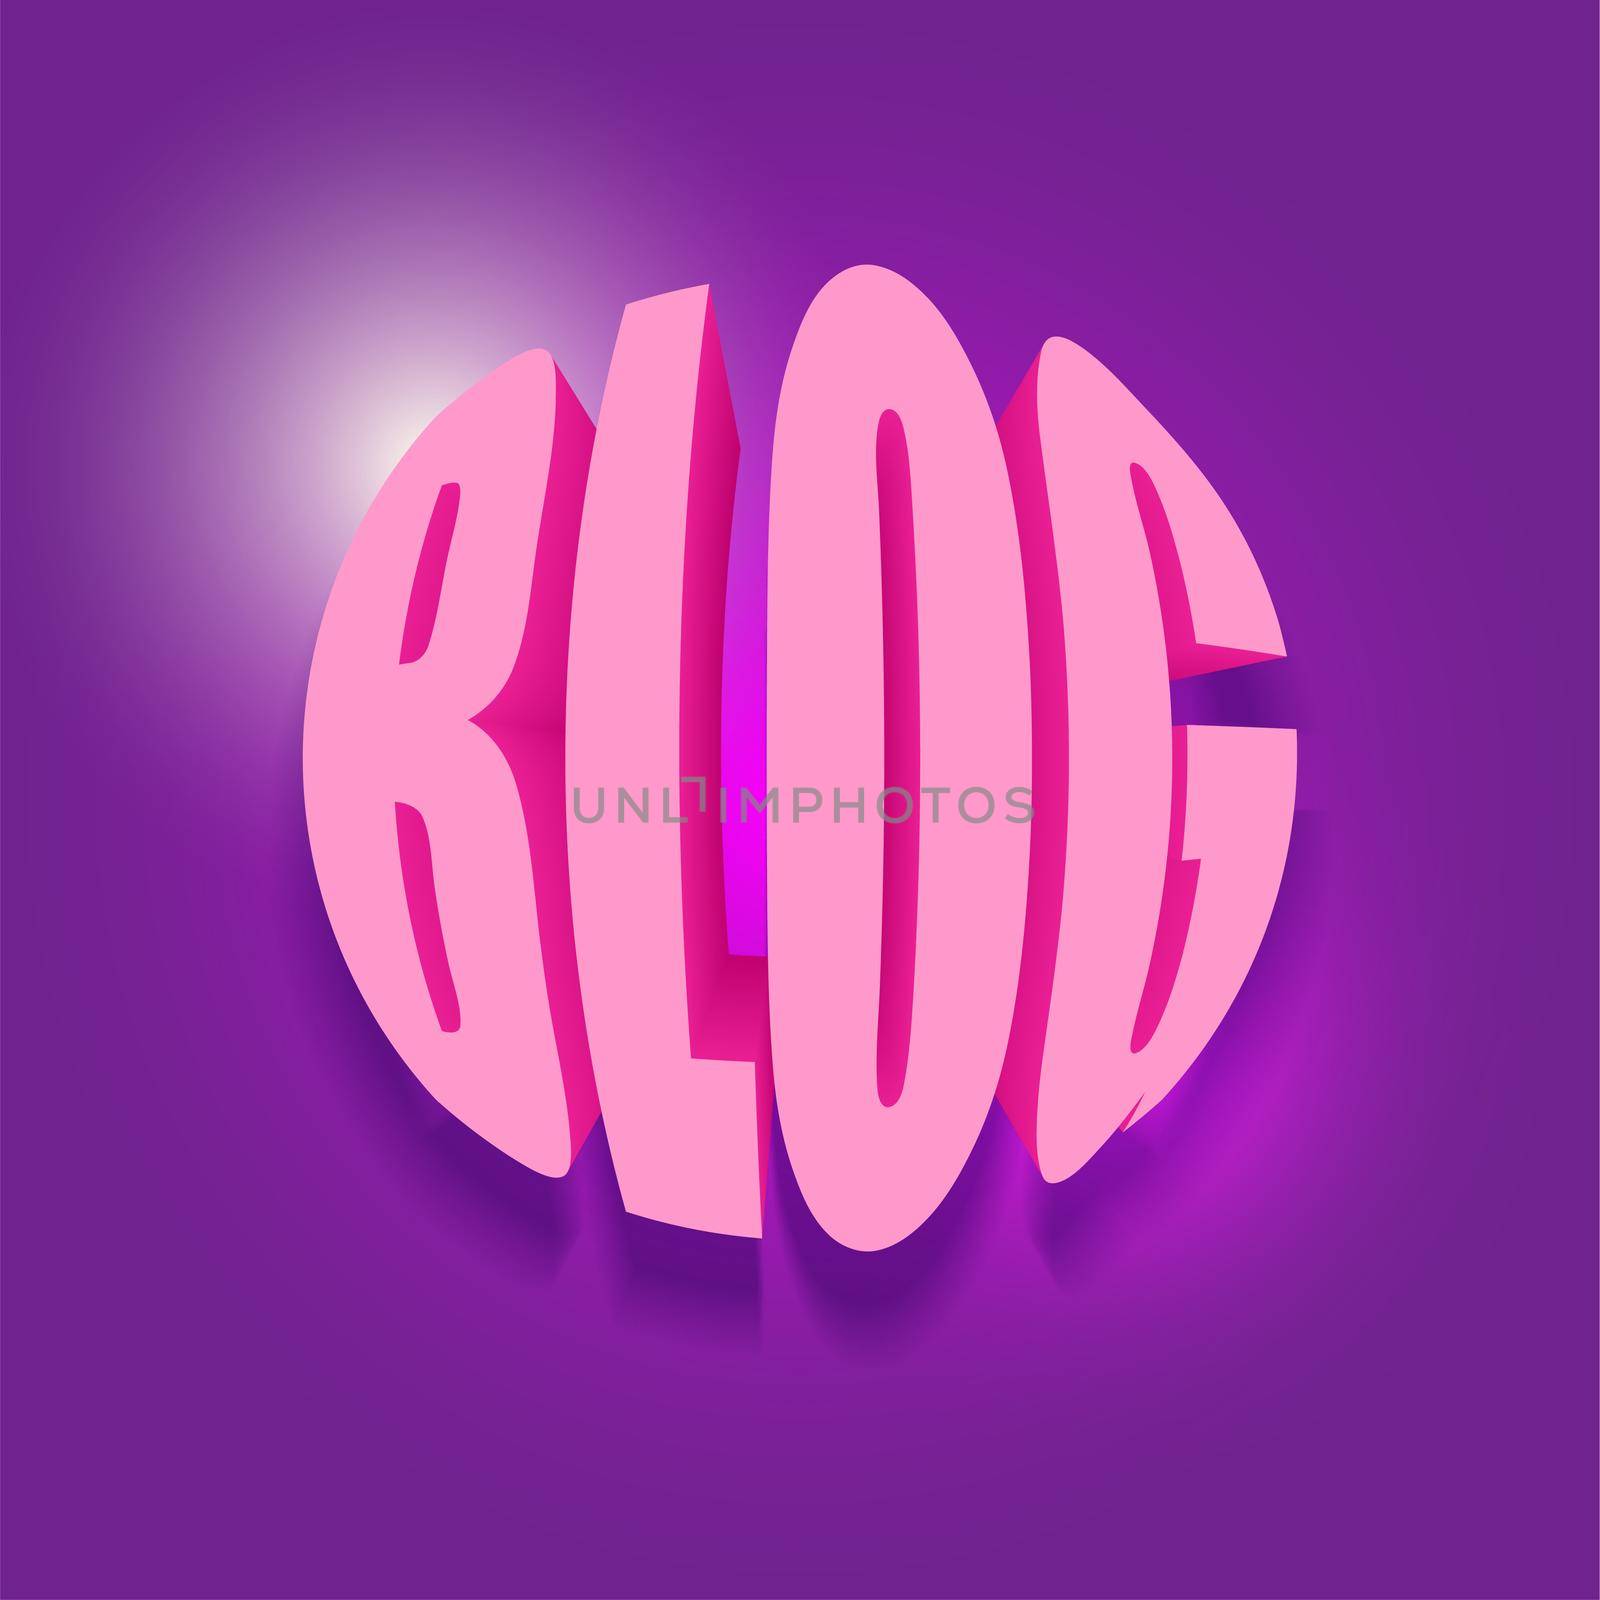 Blog. 3D pink text on purple background.